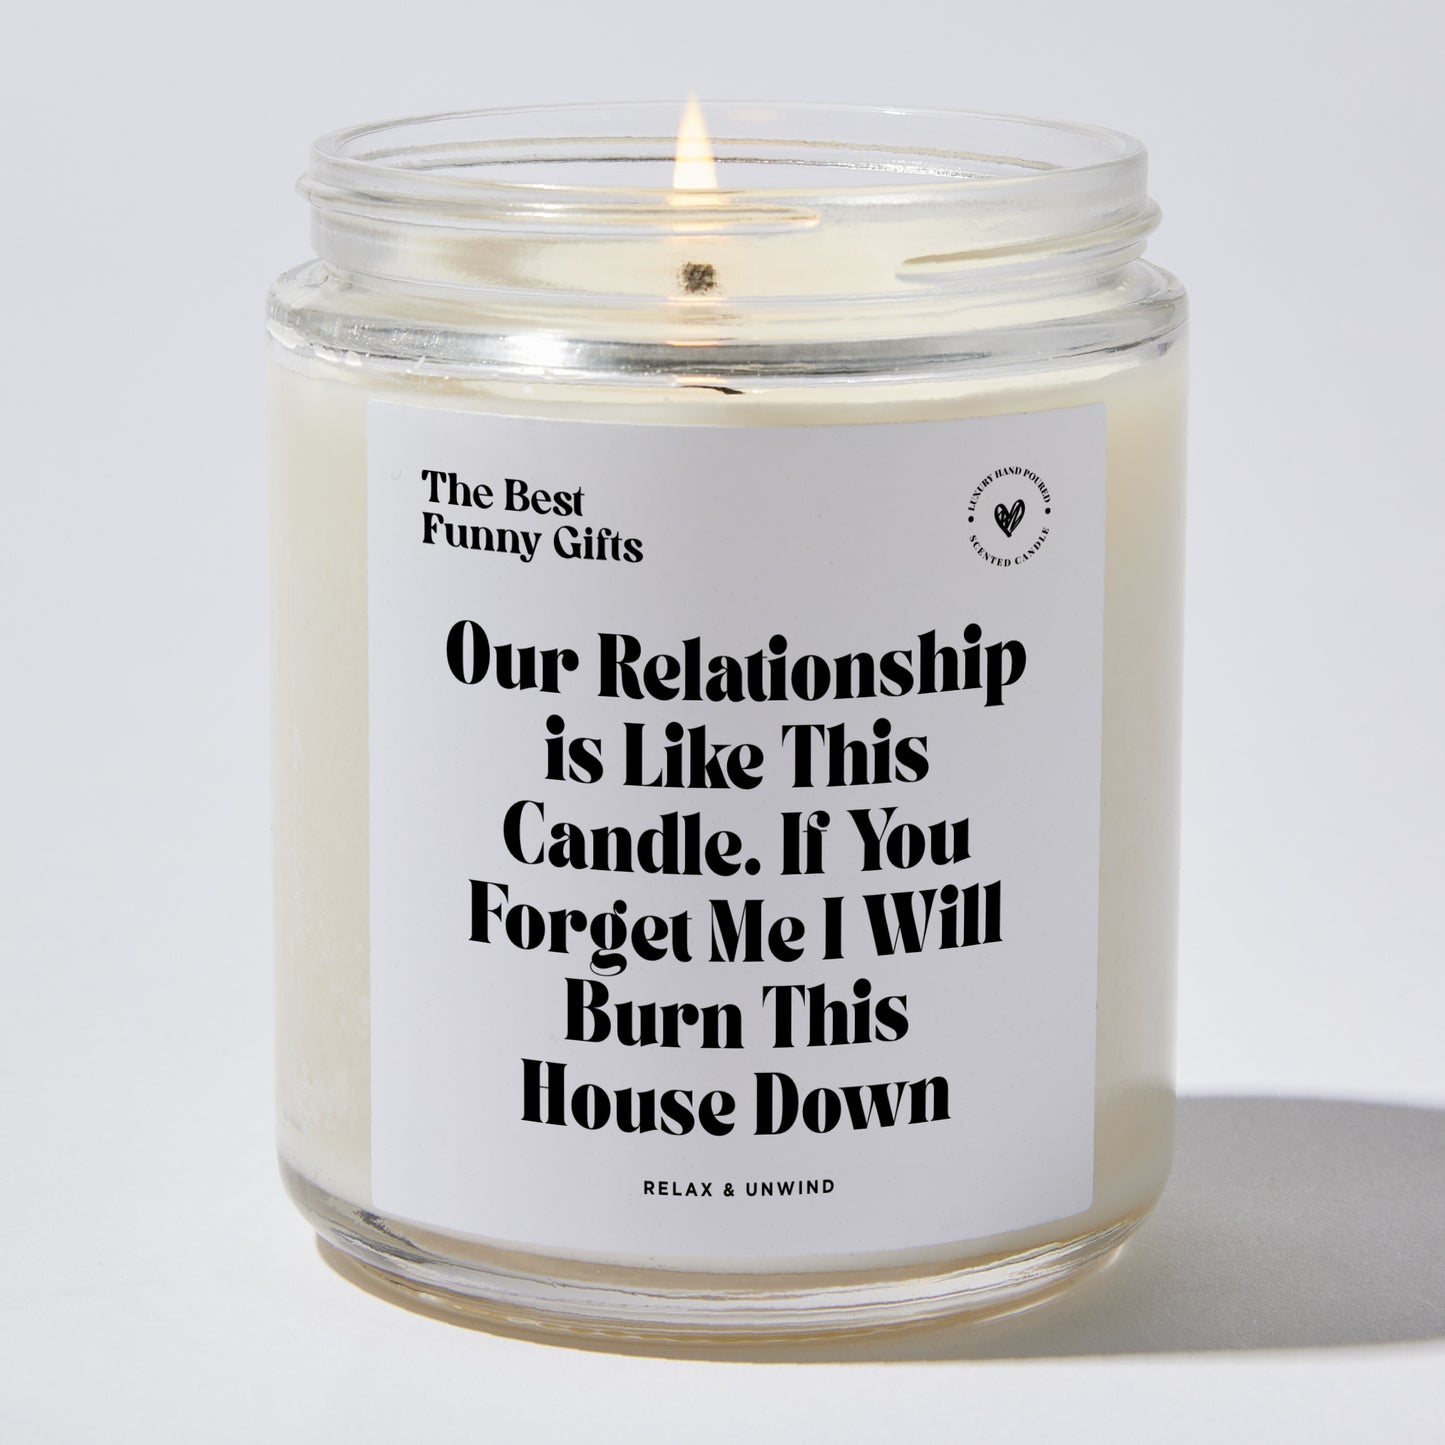 Anniversary Gift - Our Relationship Is Like This Candle. If You Forget Me I Will Burn This House Down - Candle